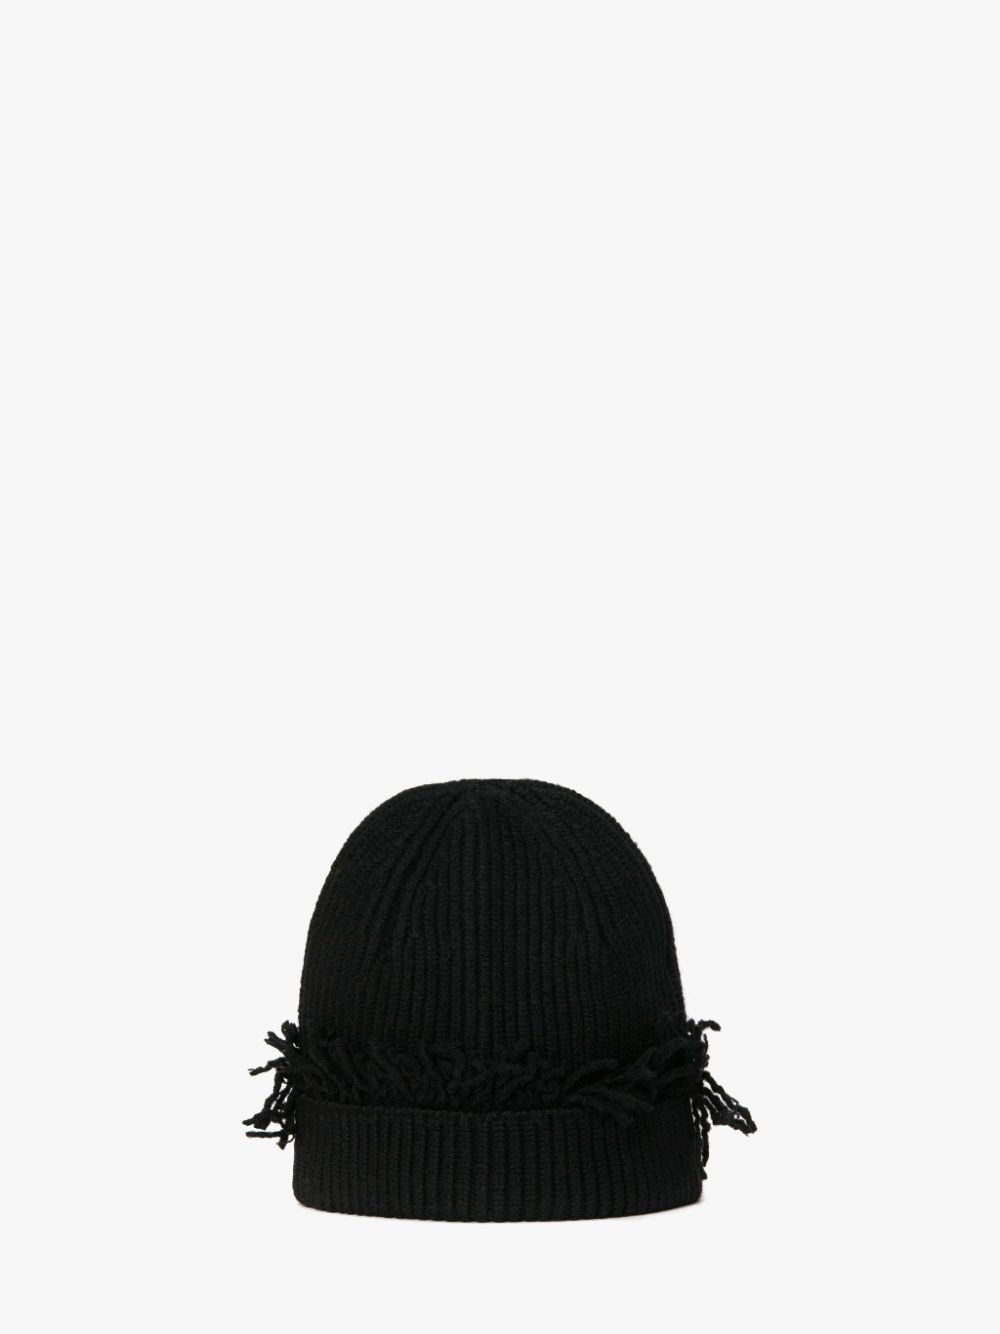 BEANIE WITH FRINGE DETAIL - 3